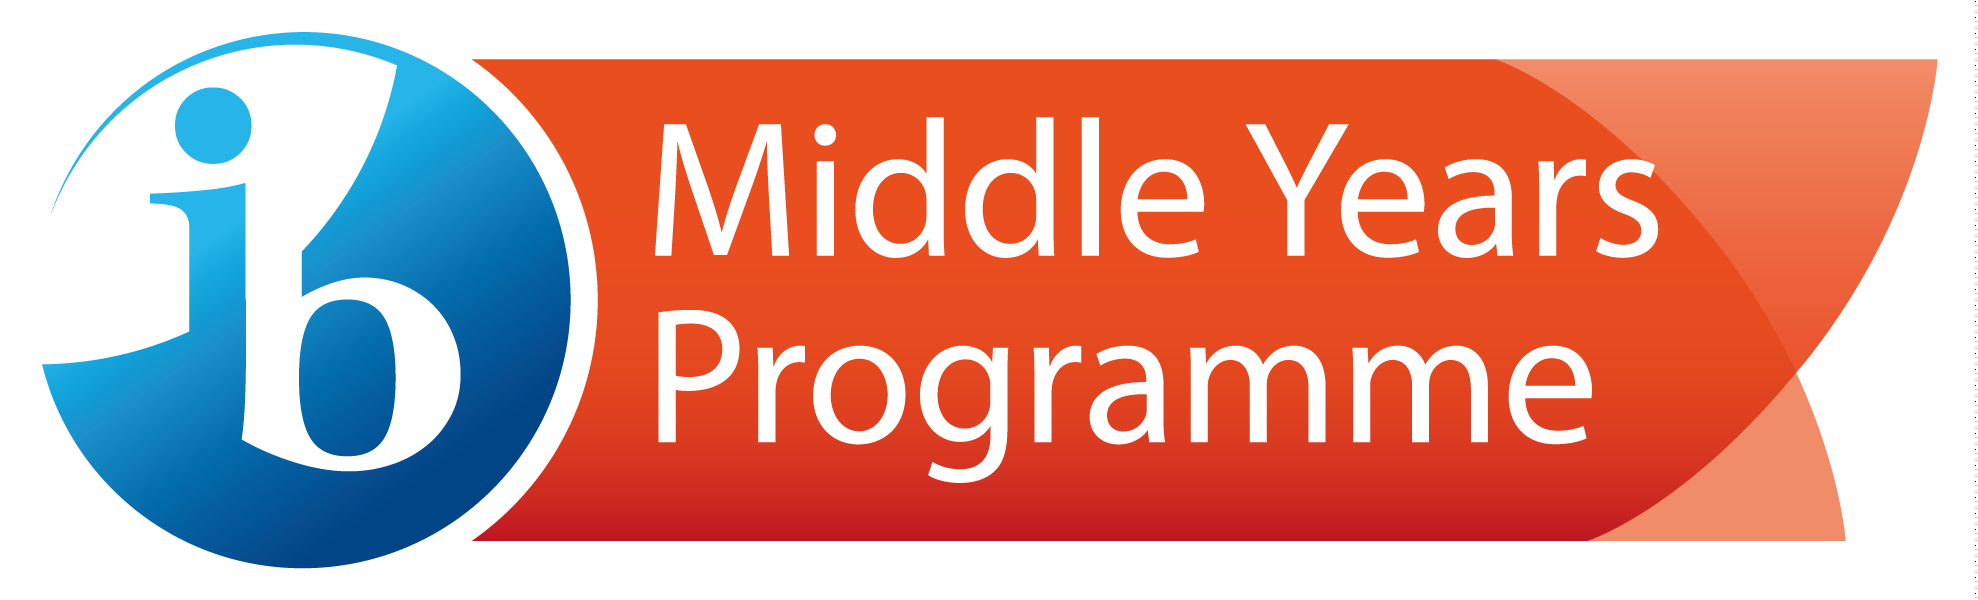 IB logo with middle years programme text